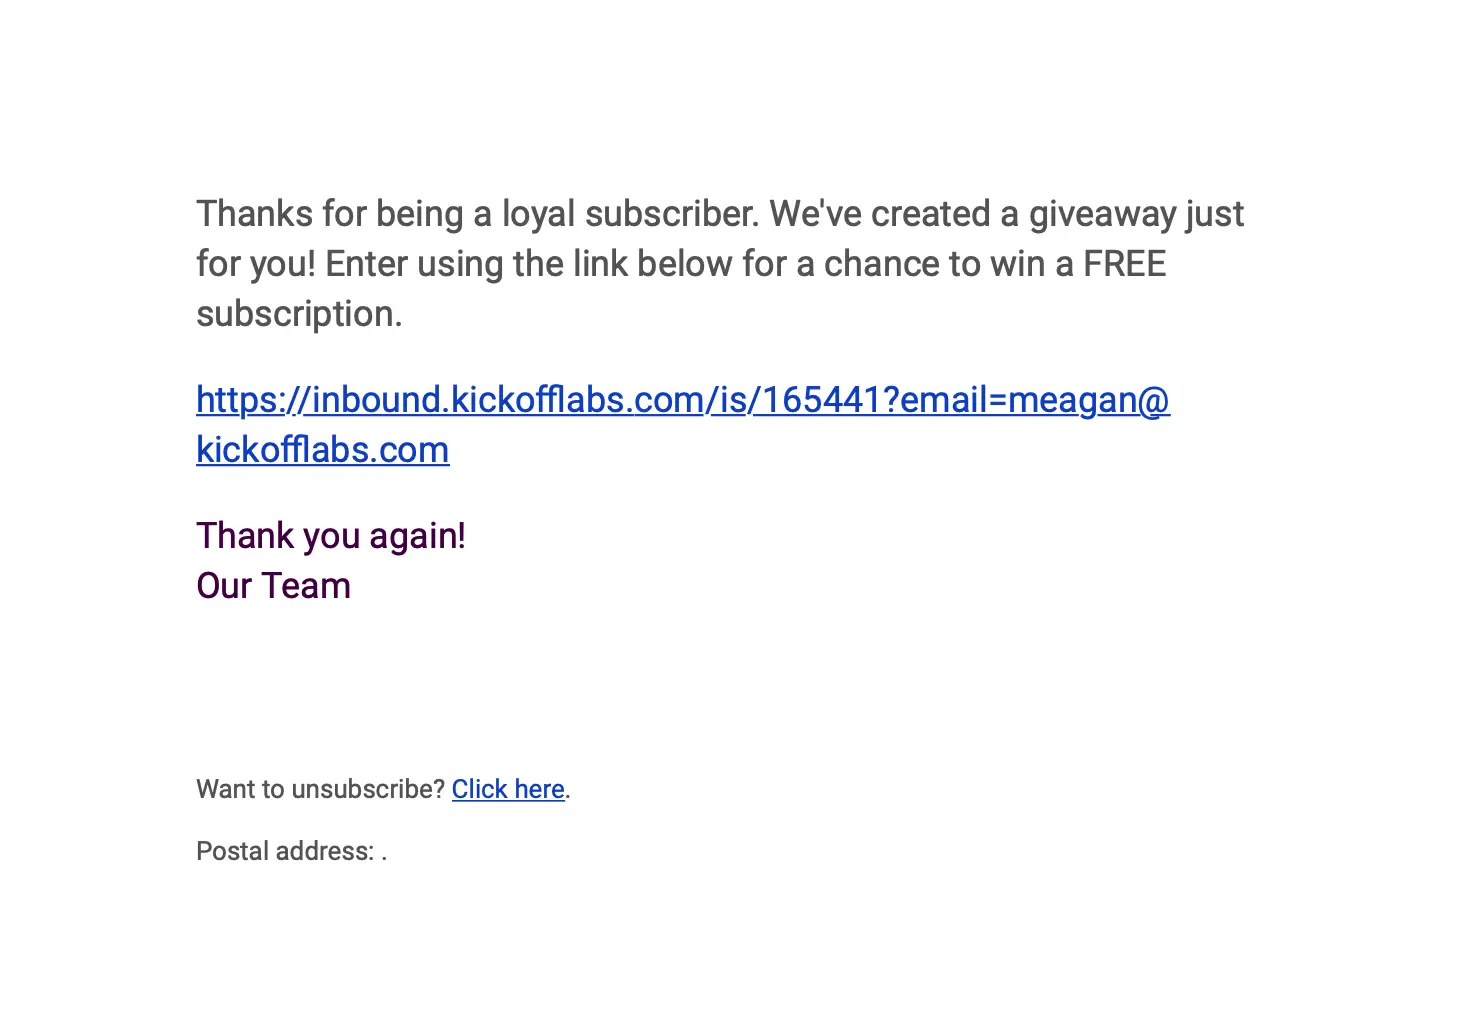 Instant sign-up link email example: Thank you for being a subscriber, click here to enter to win